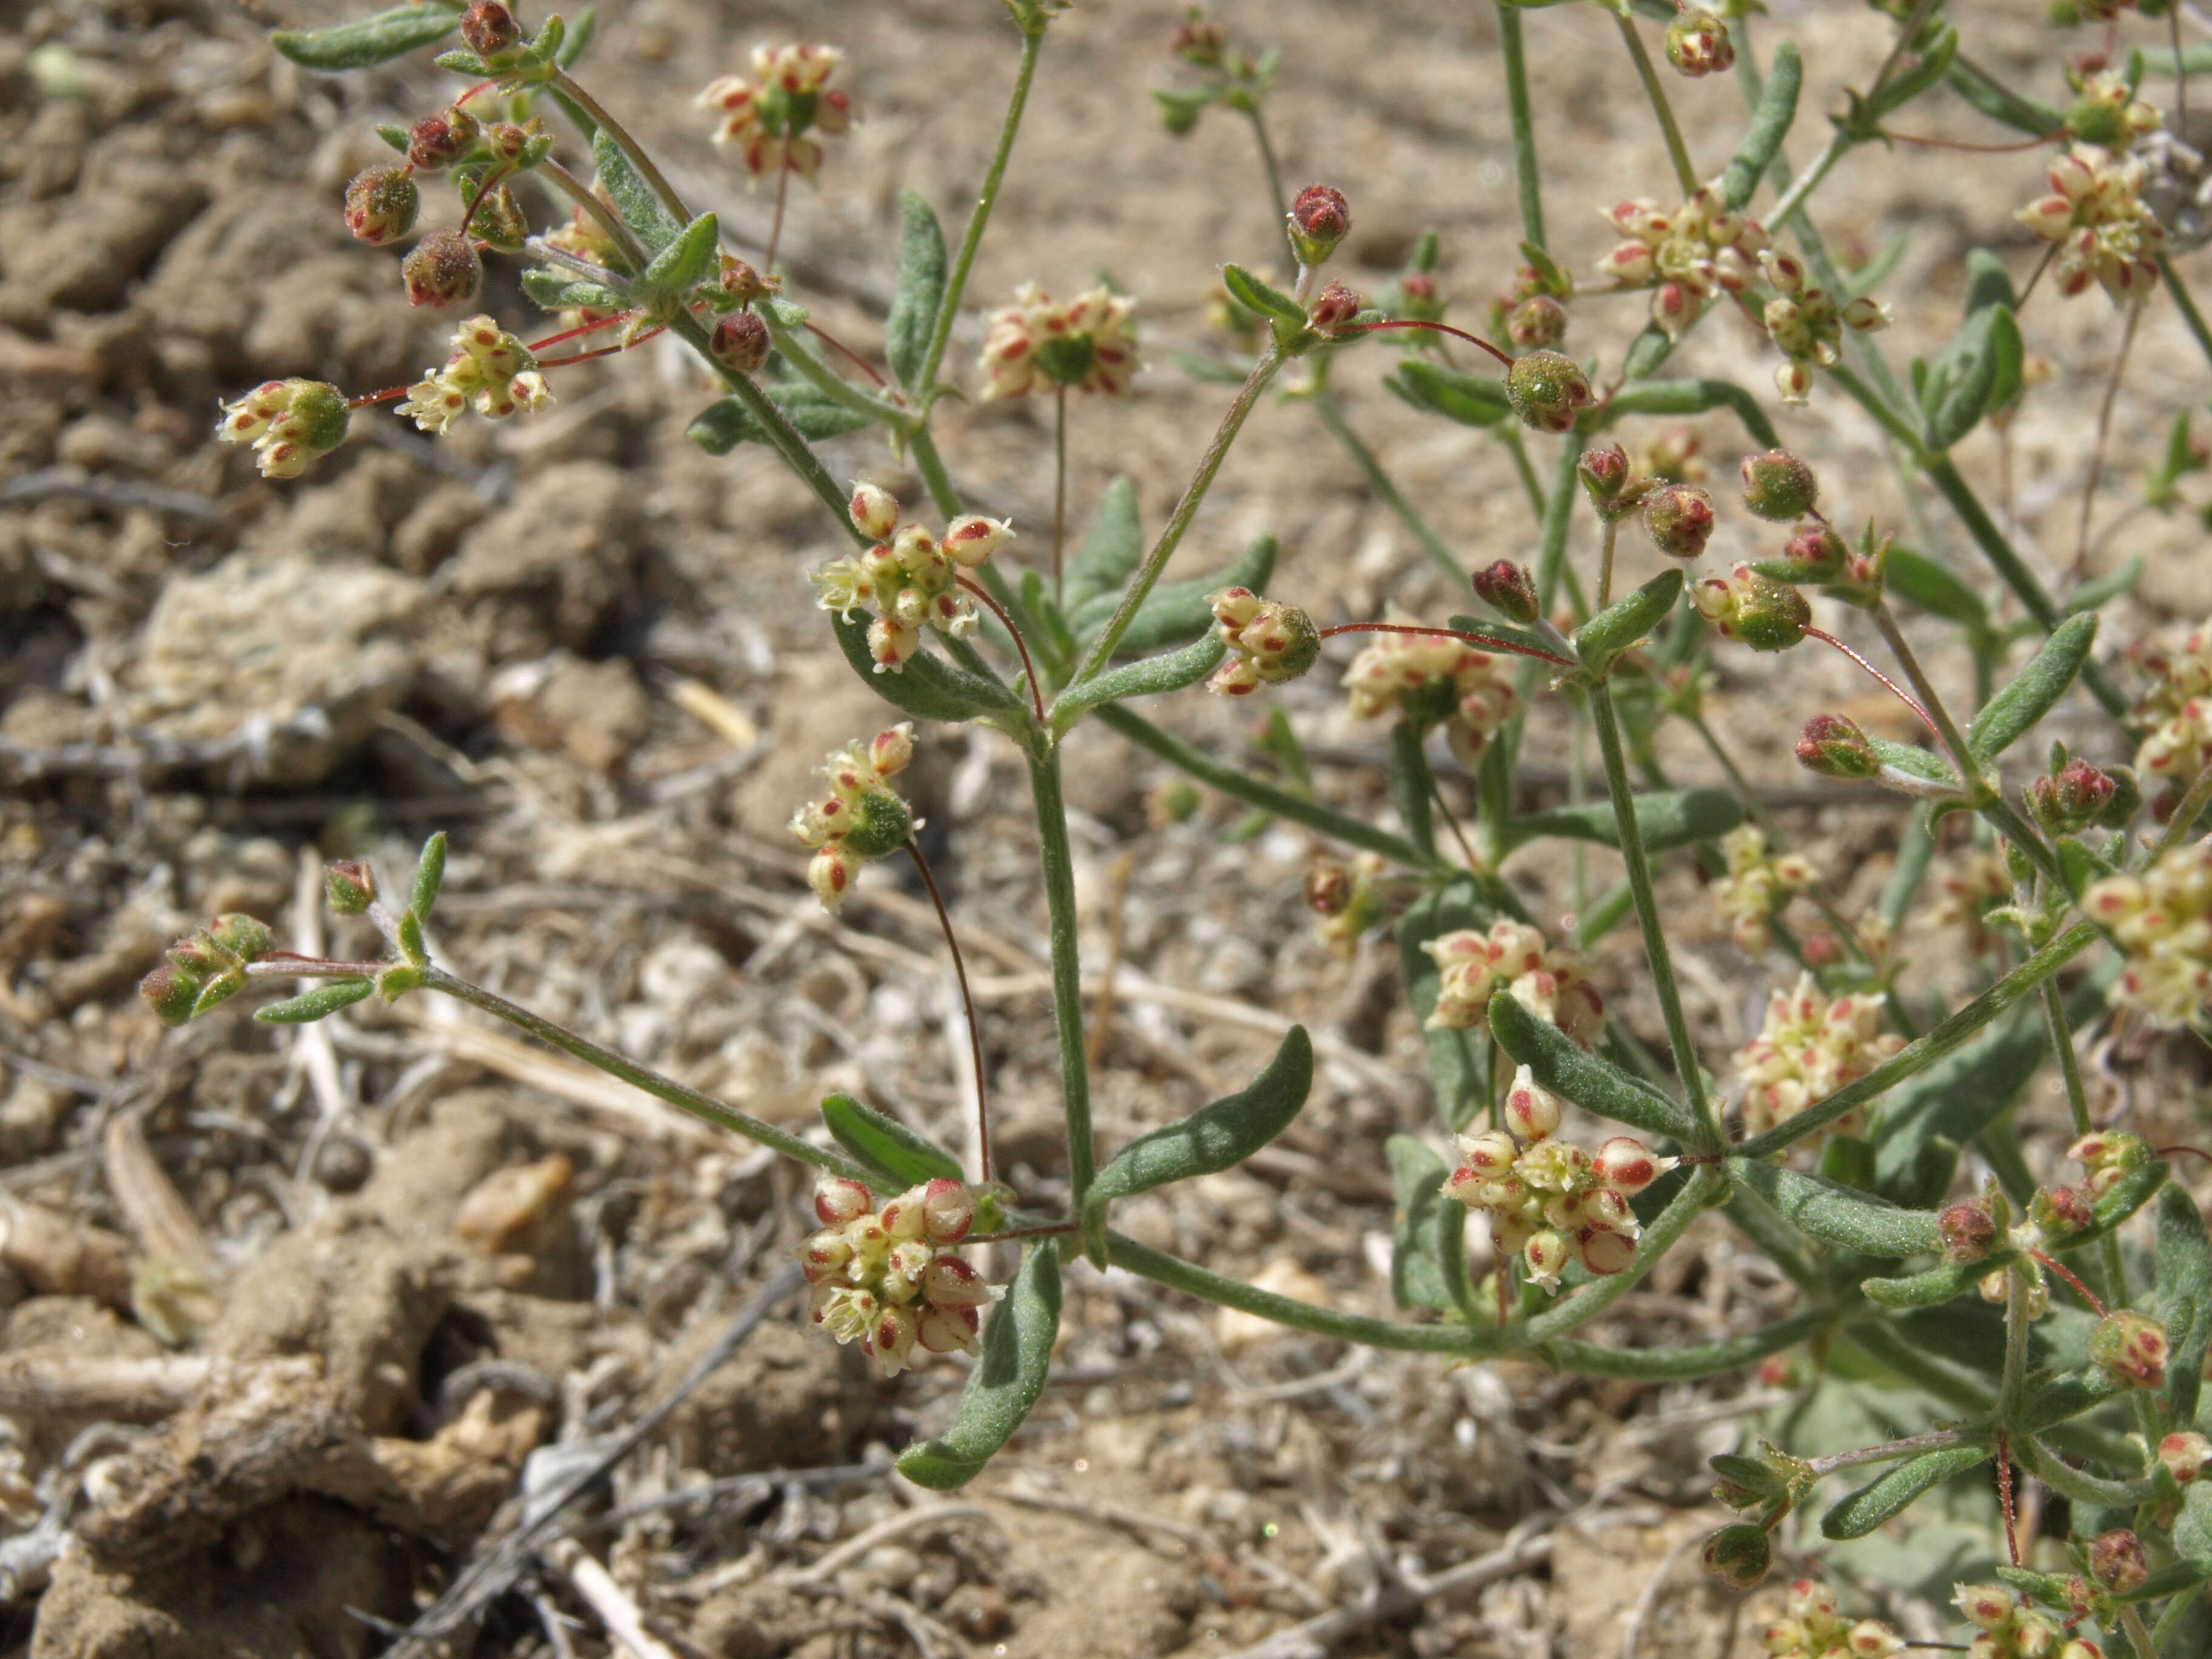 Image of spotted buckwheat